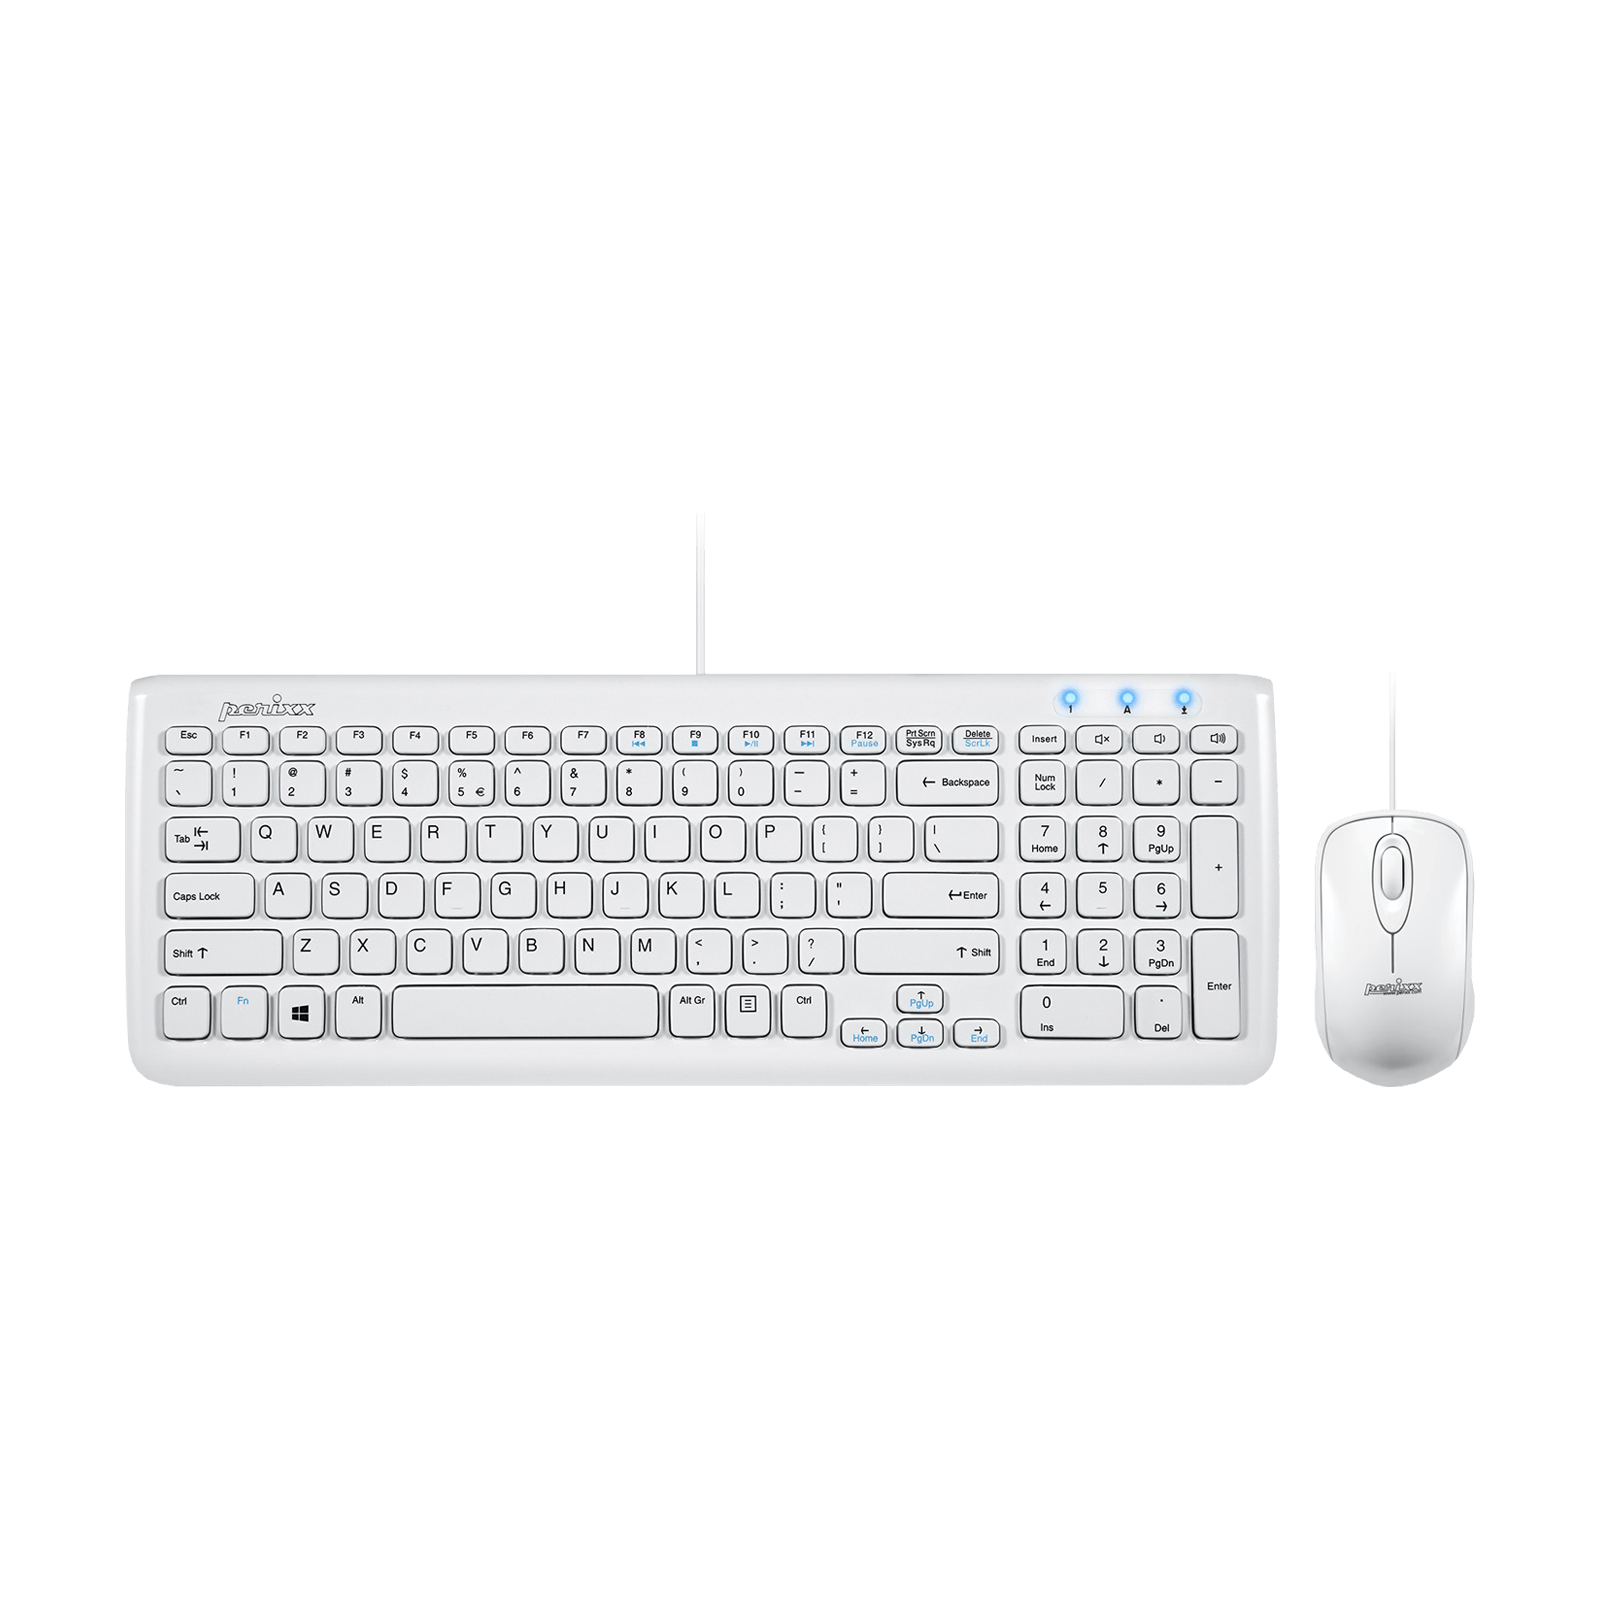 PERIDUO-303 W - Wired White Compact Combo (90% Keyboard and Mouse) - Perixx Europe